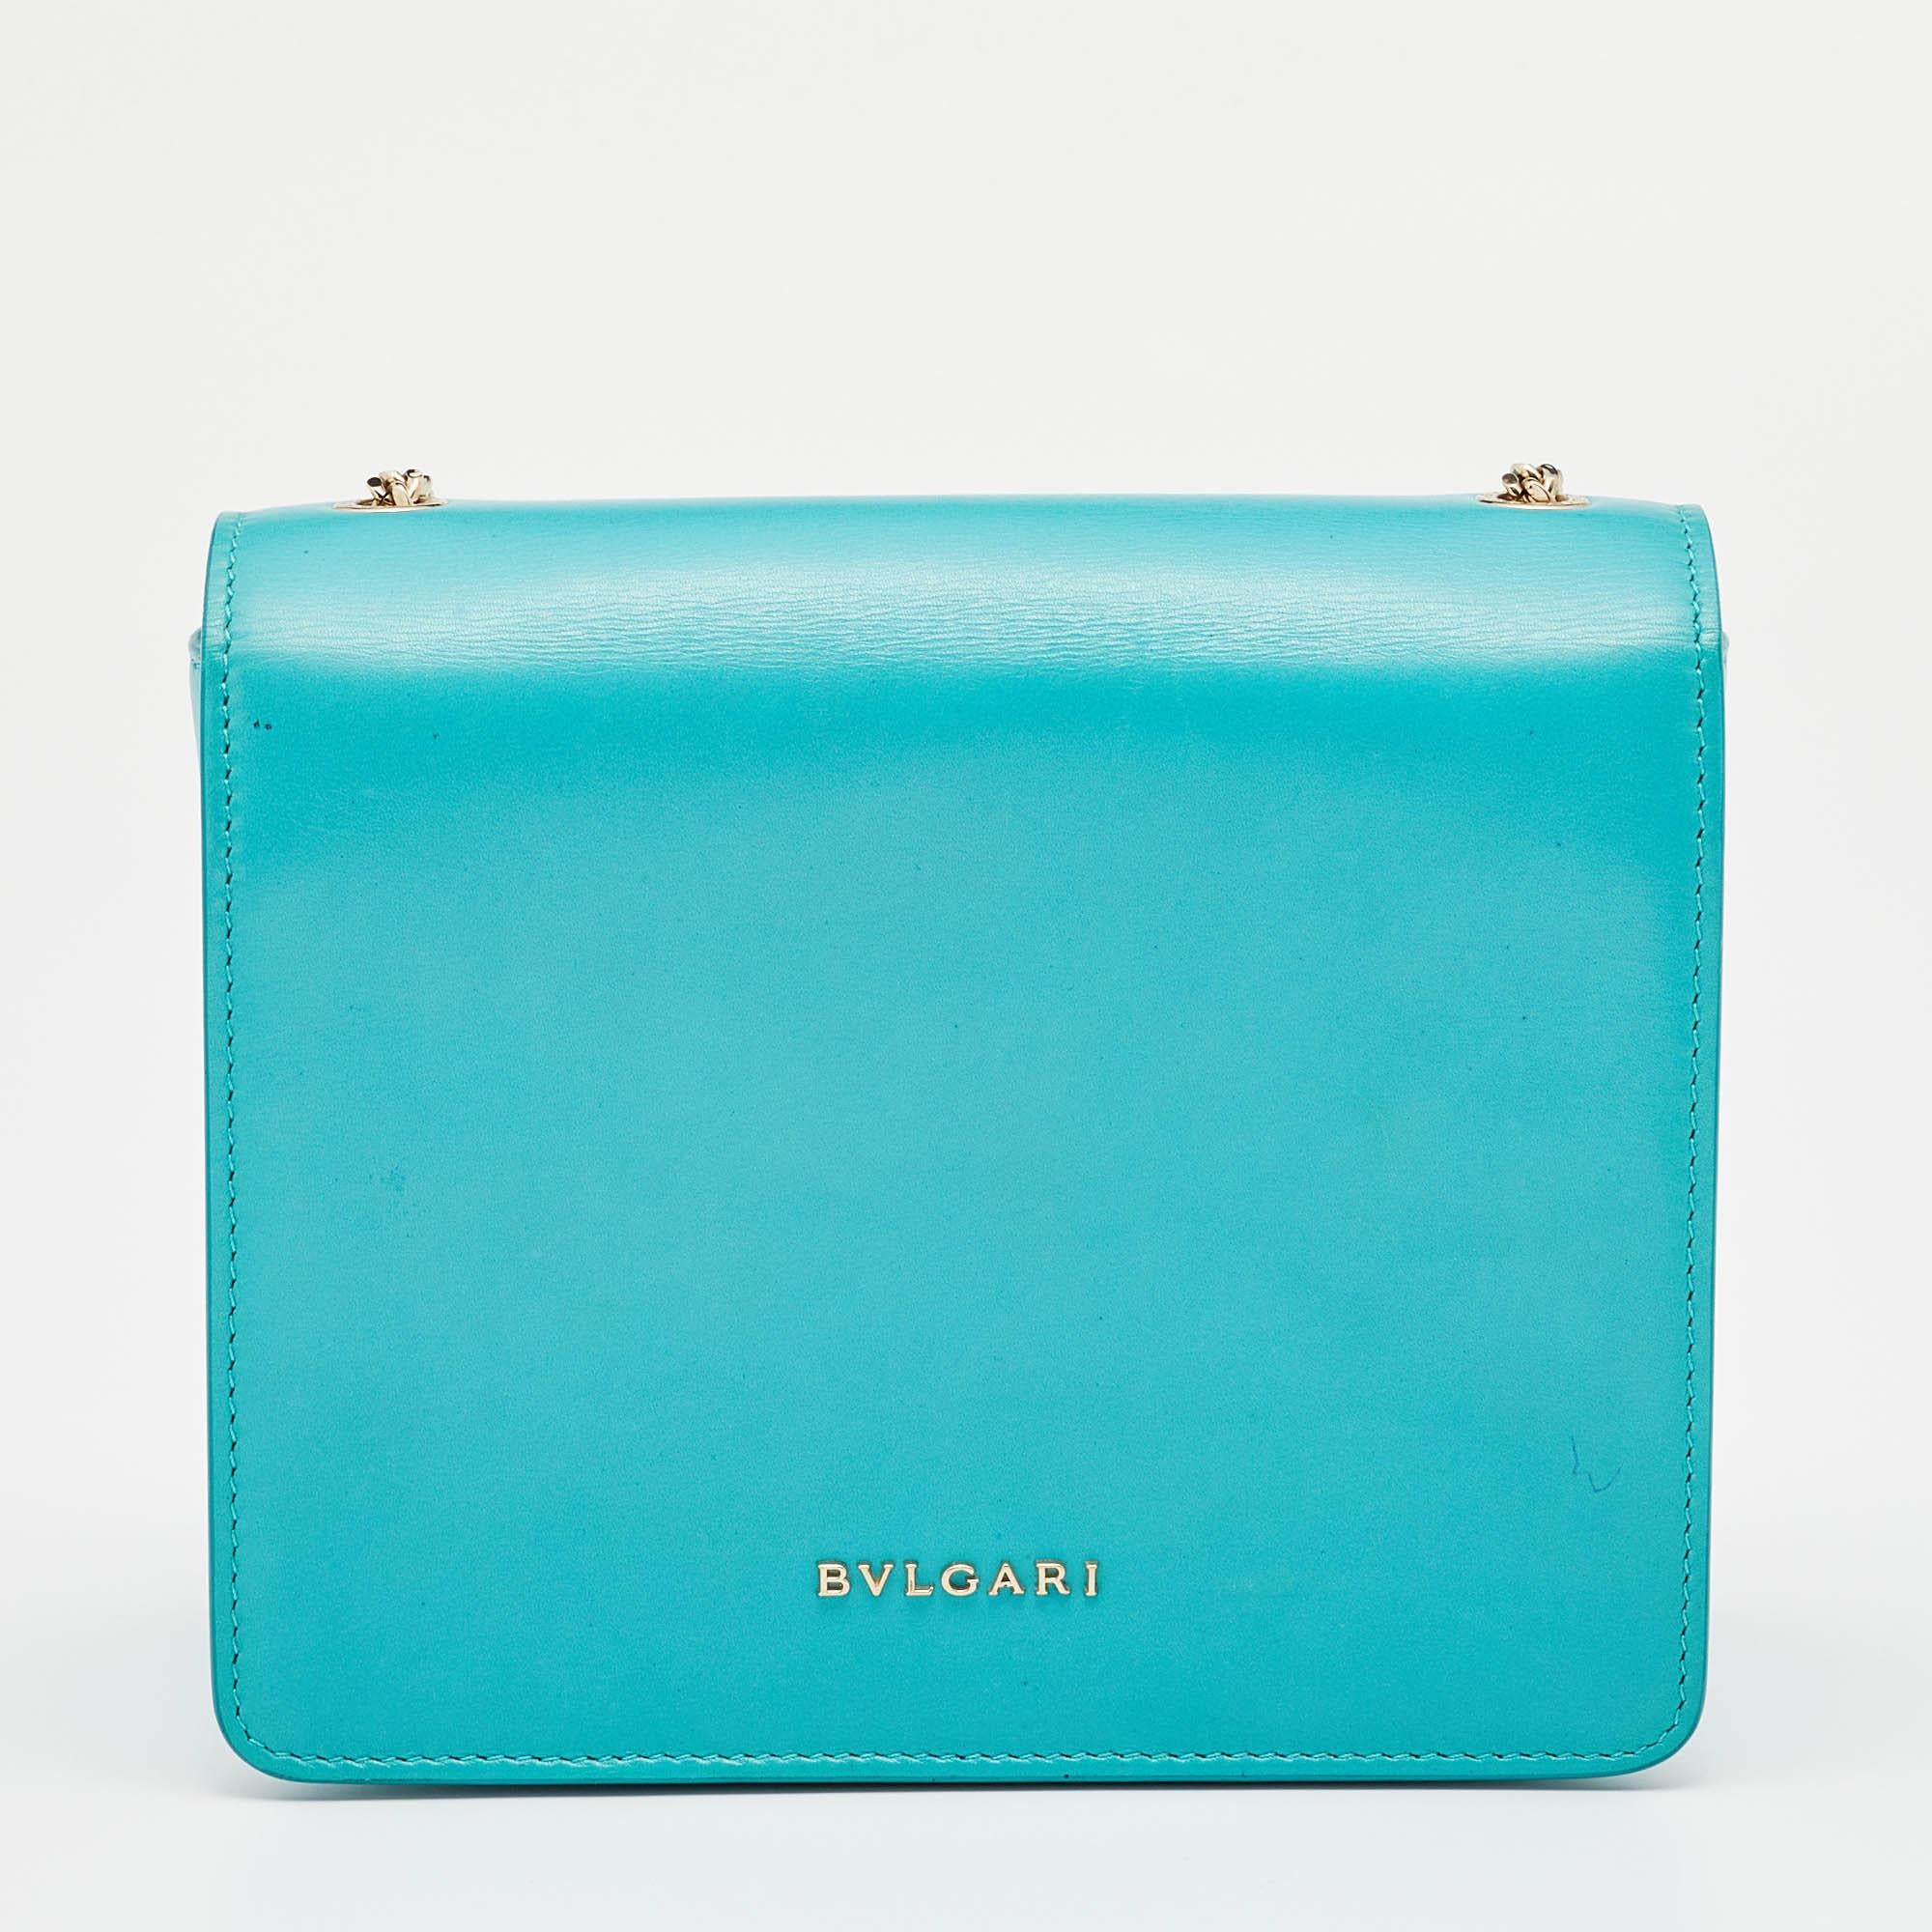 This Bvlgari bag reflects the magnificent designs and refined construction of the brand. Made from turquoise leather, the brand signature on the front offers it a recognizable accent, and it can be carried in a chic way with the shoulder strap. The